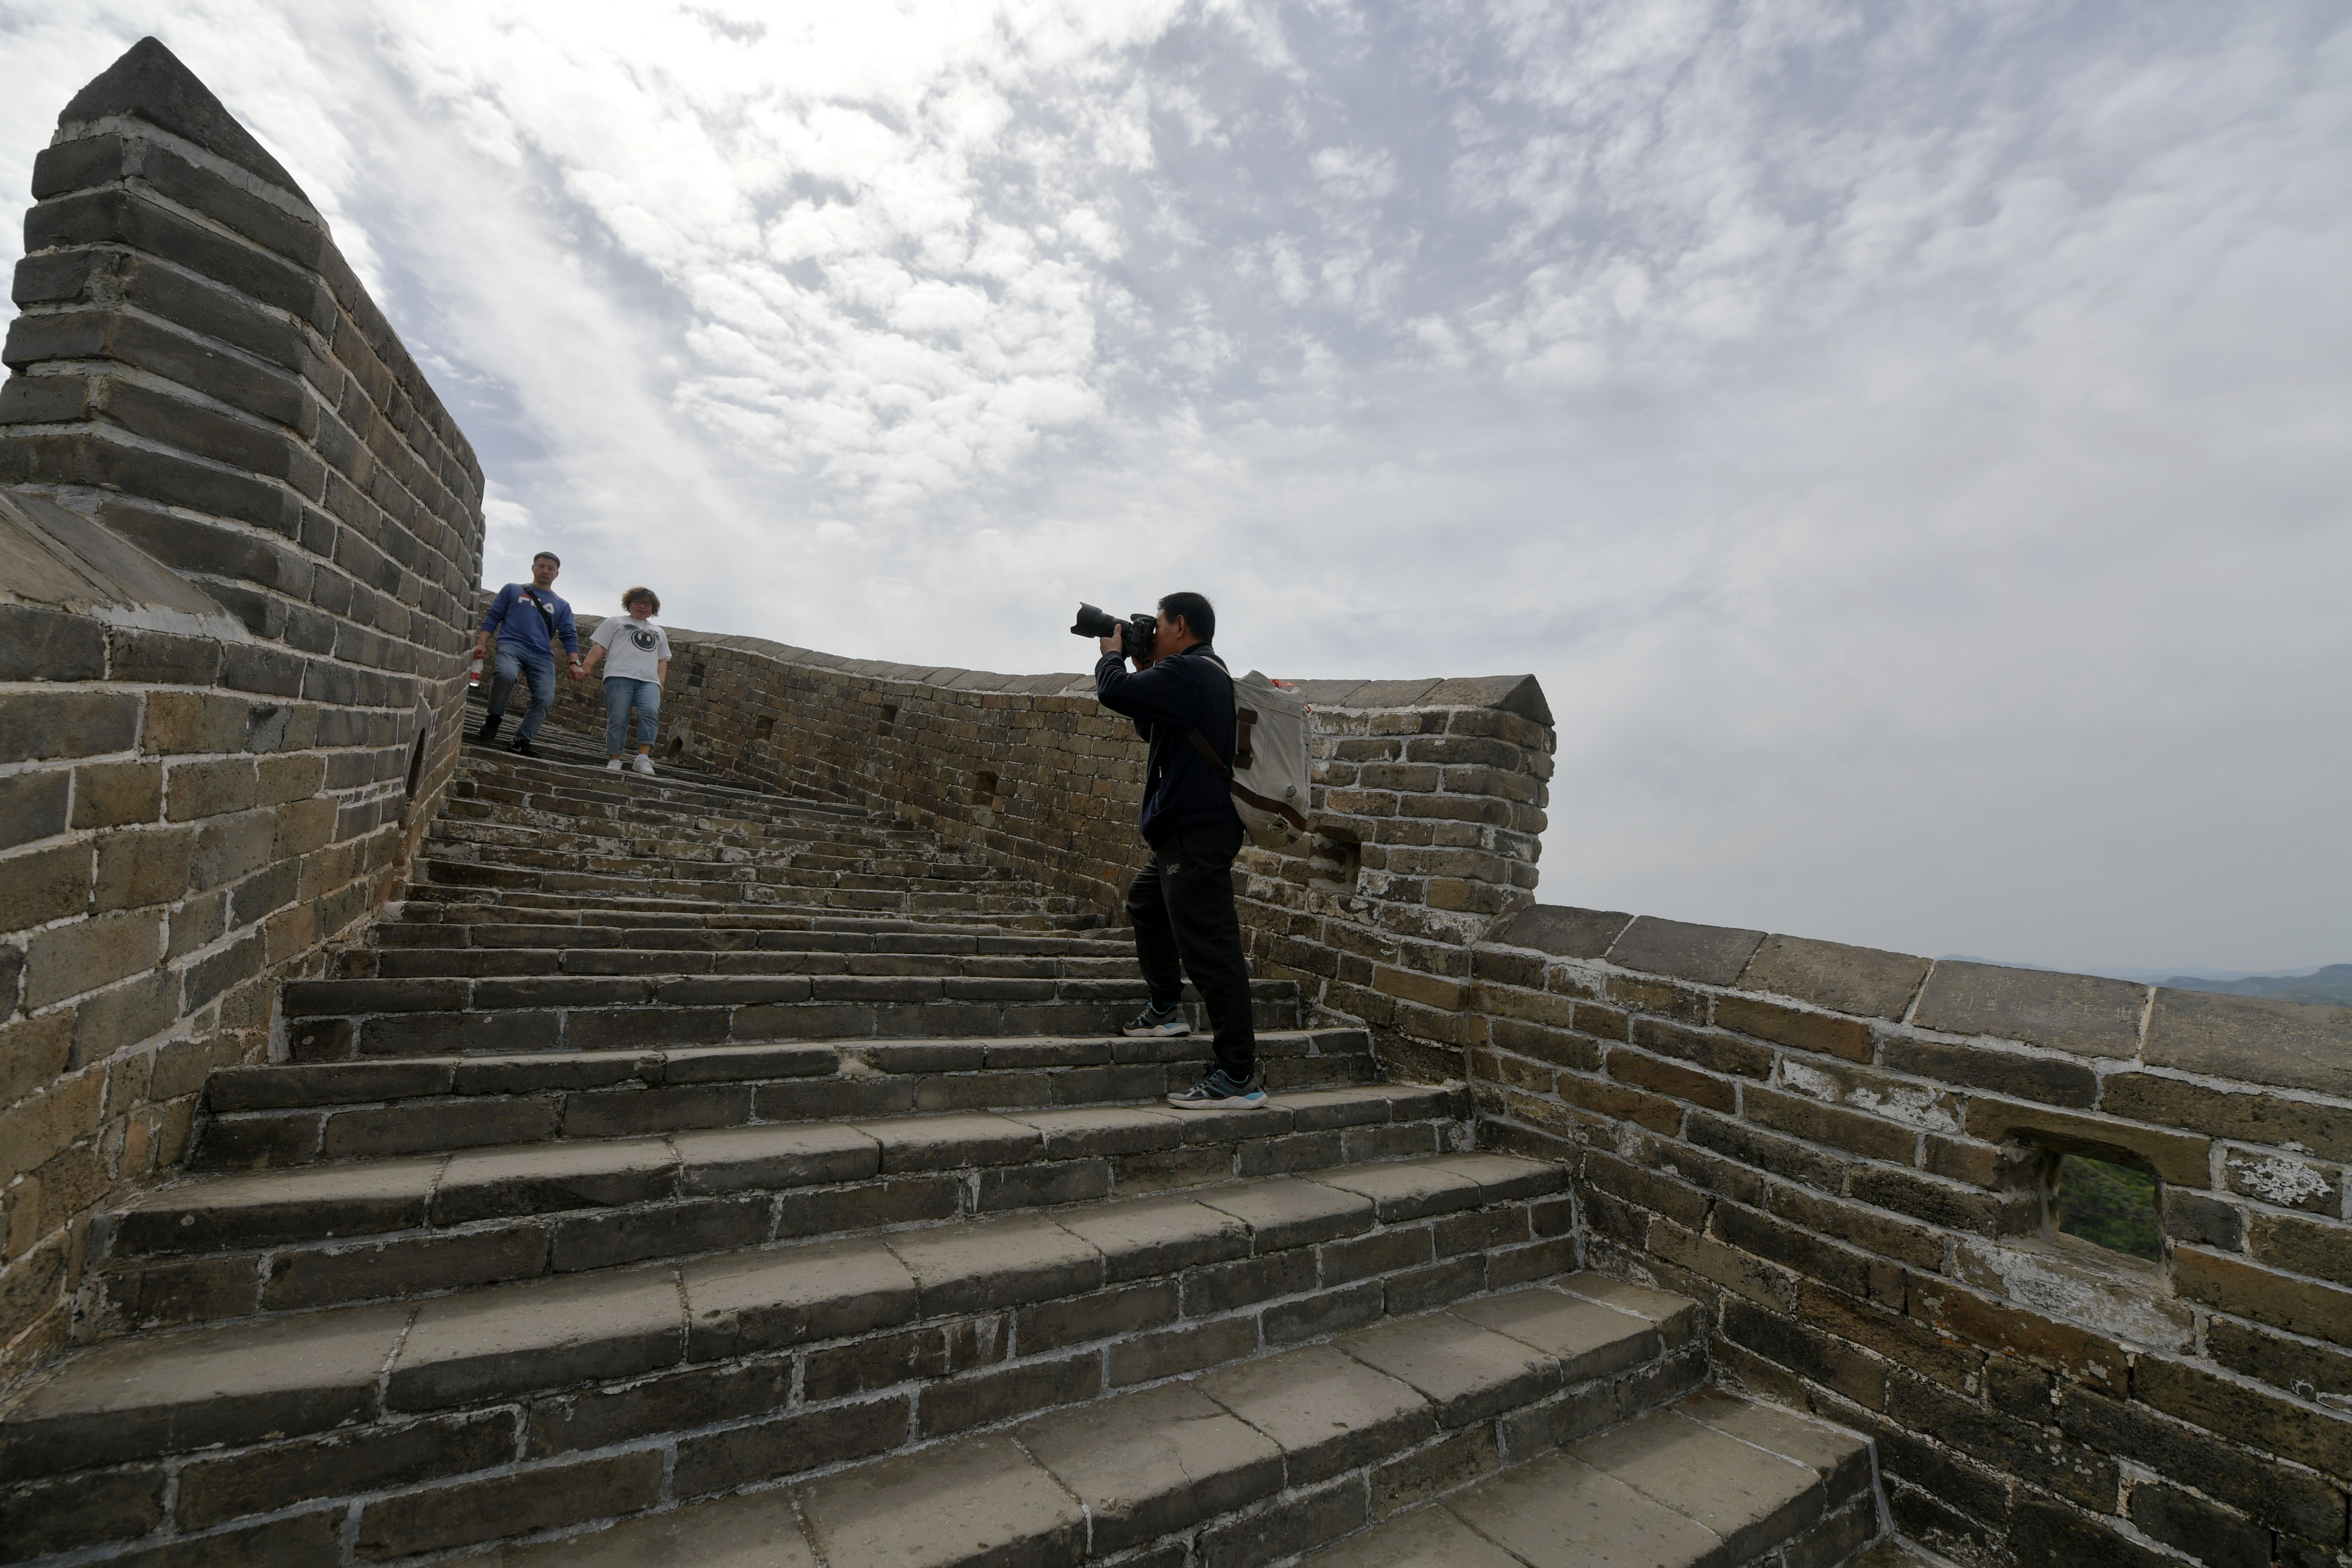 Zhou Wanping has been taking photos of the Great Wall for decades. / CNSPHOTO